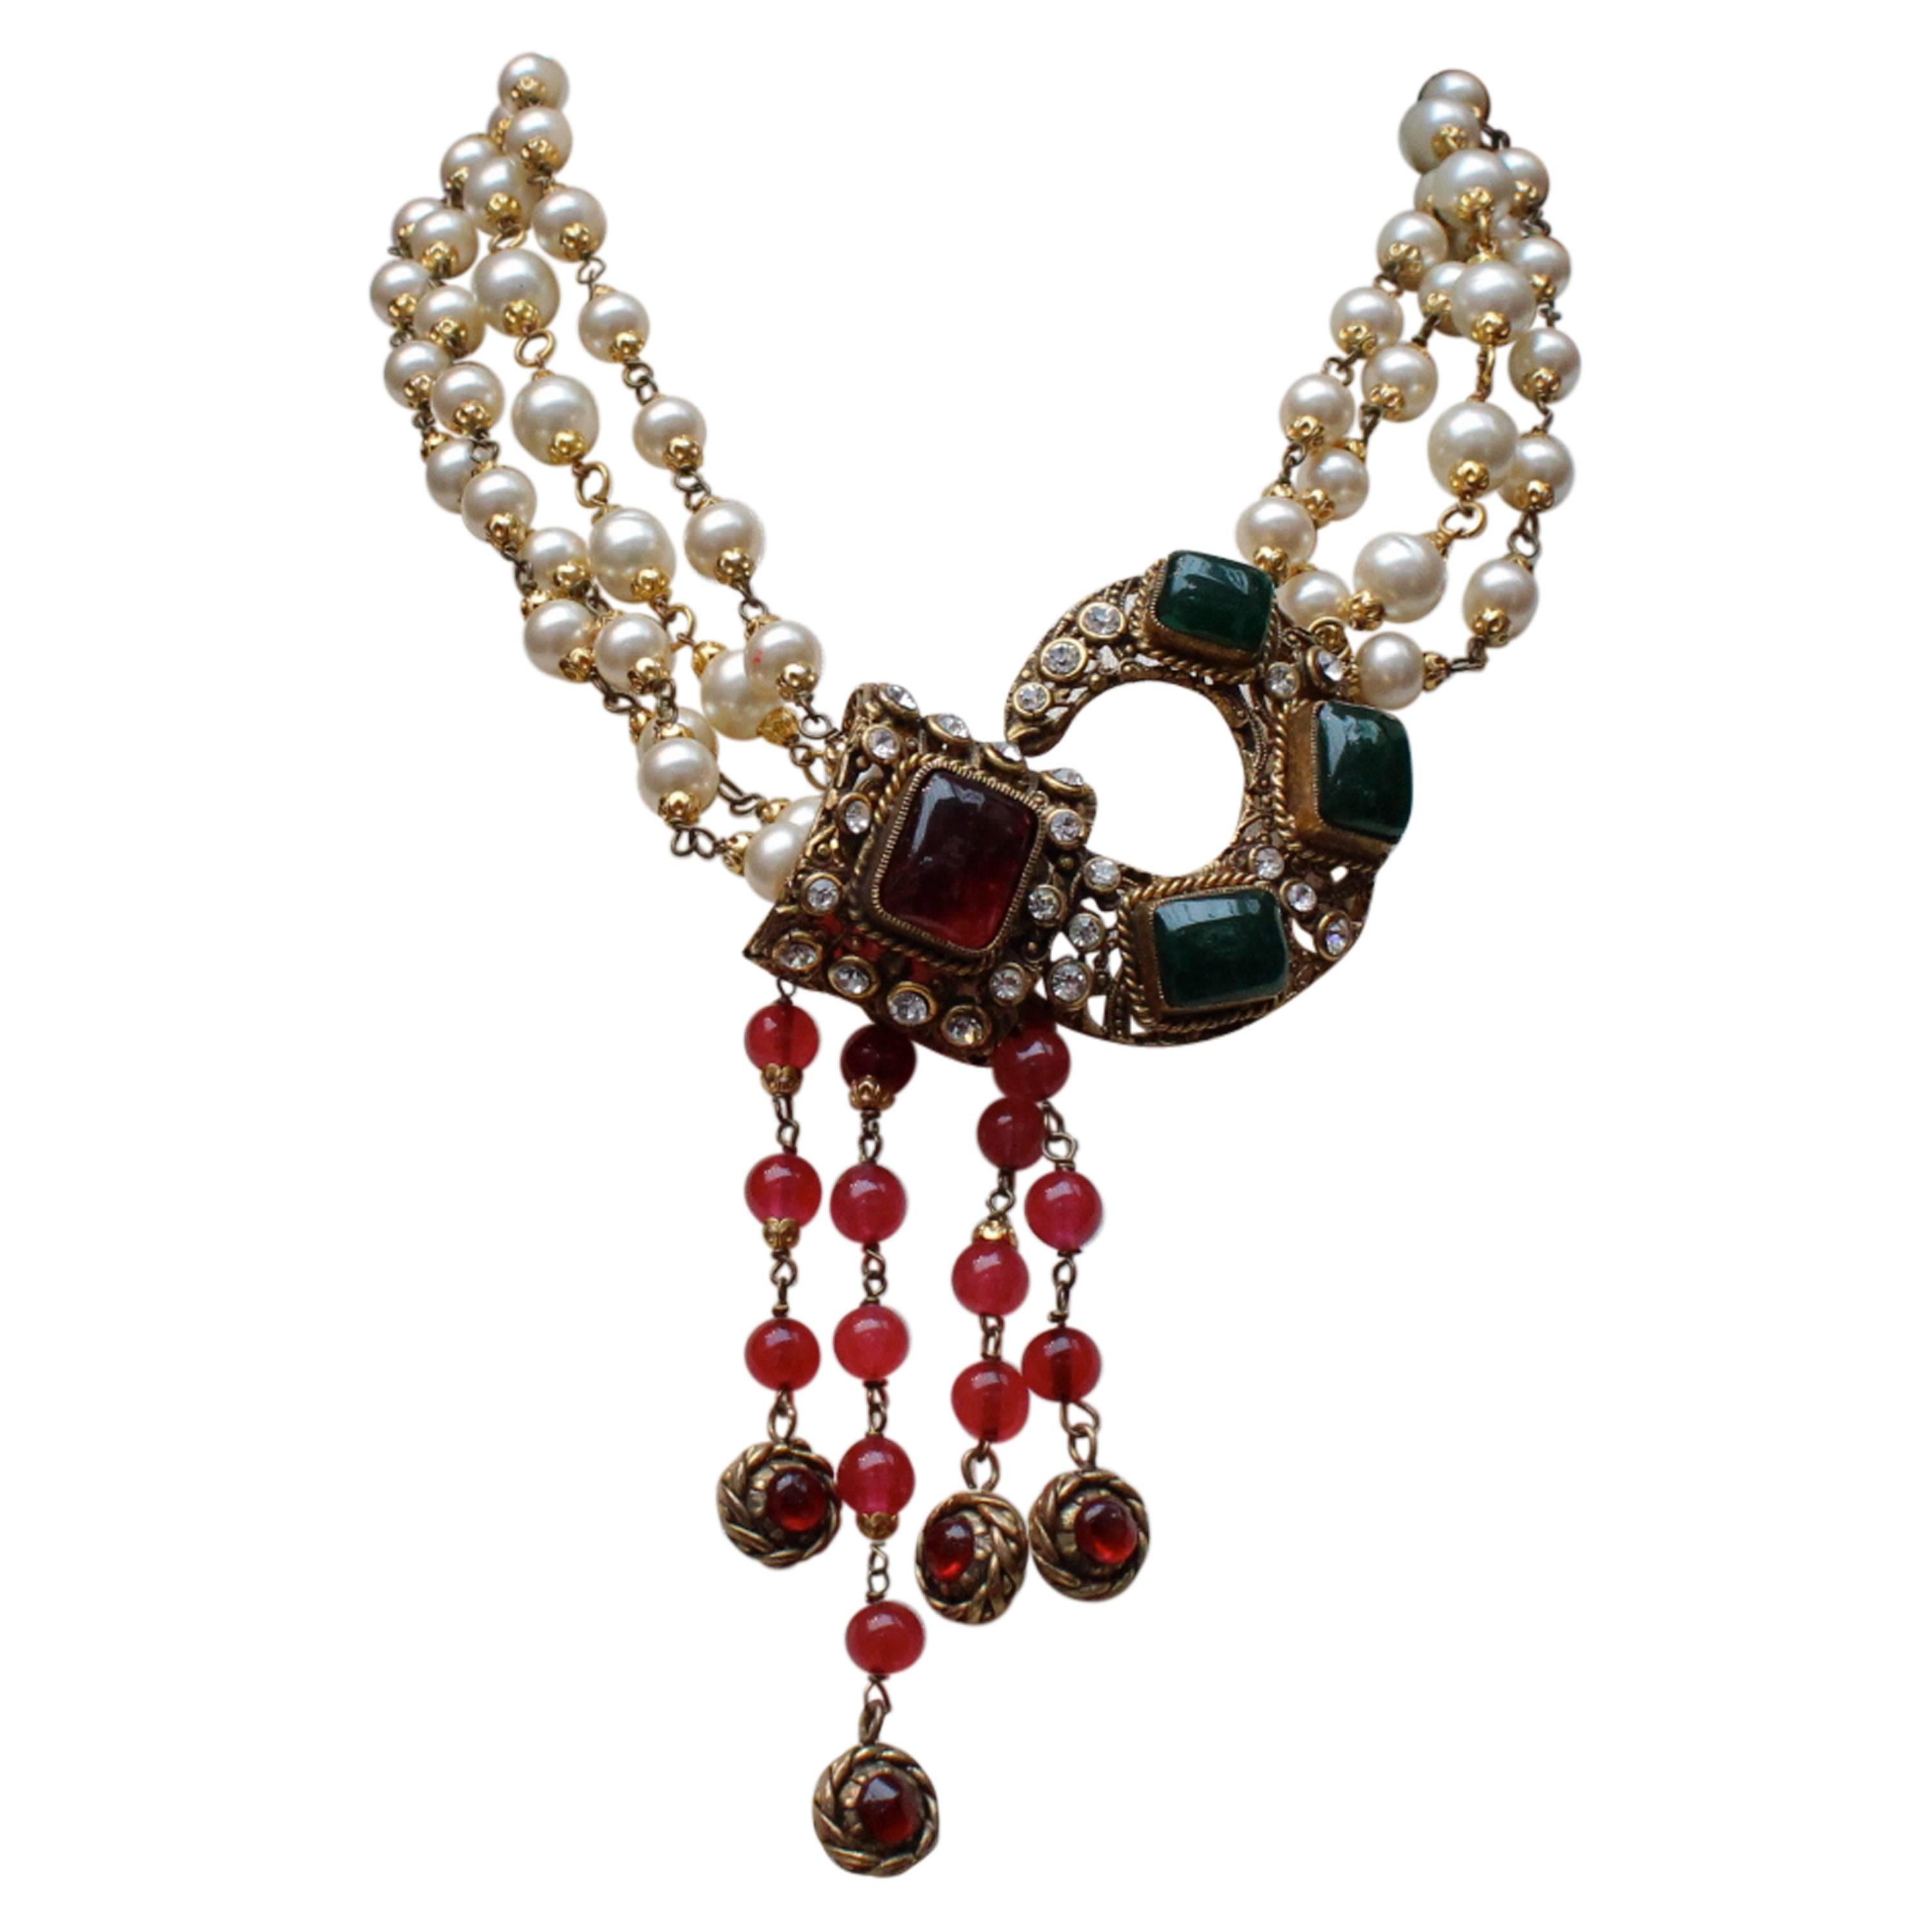 1984 Chanel necklace with Faux Pearls and Red and Green Glass Paste